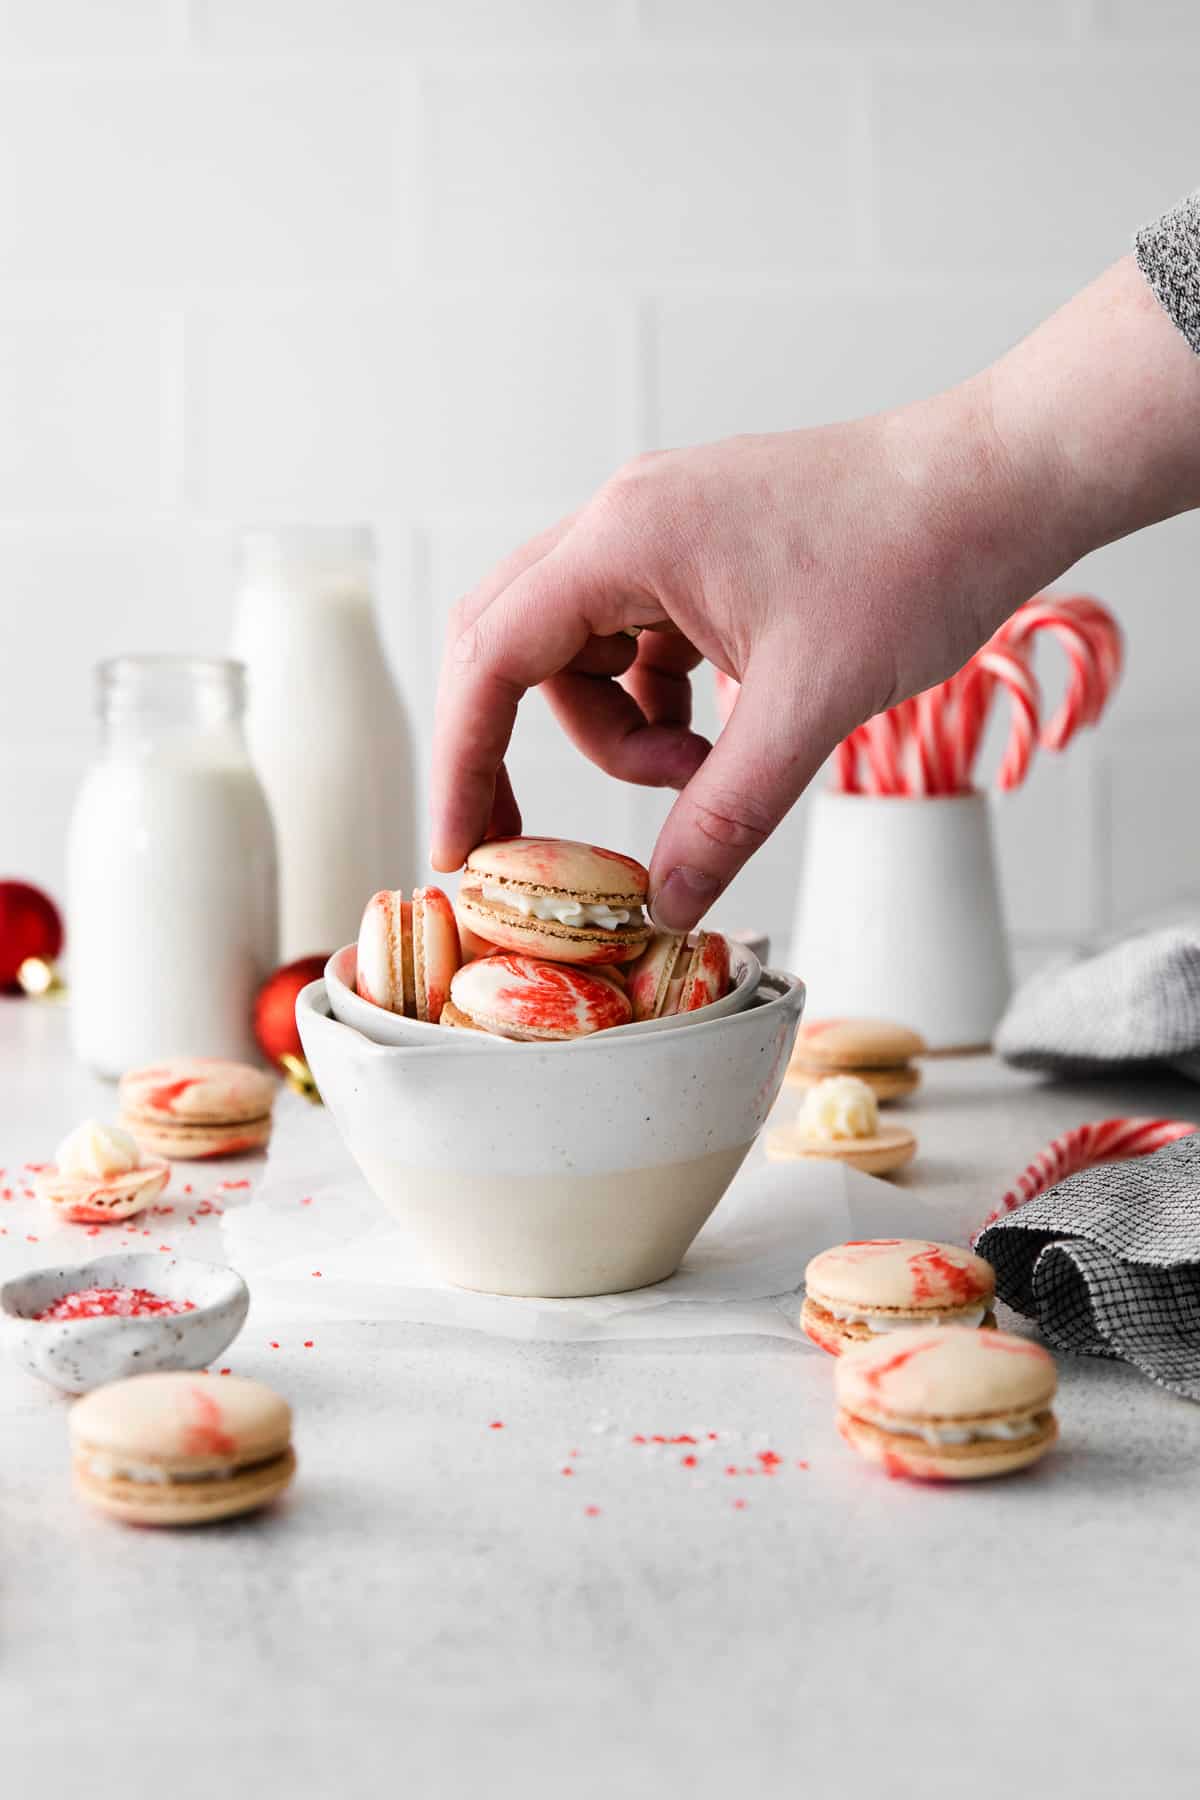 A hand reaching to pick up a peppermint macaron from a bowl.